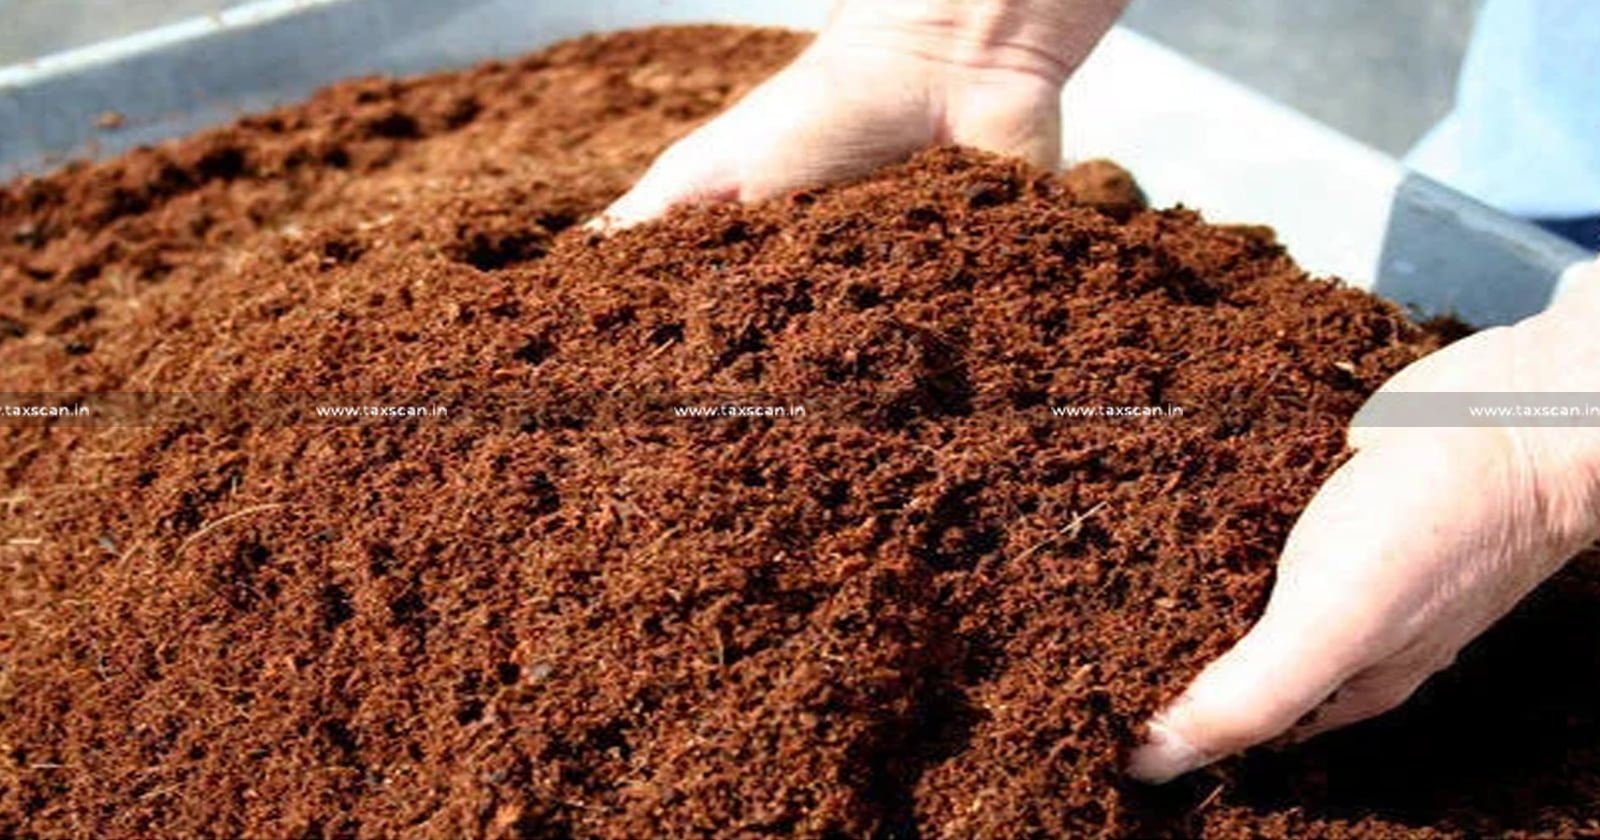 supply - Coir pith compost - supply of Coir pith compost - GST - AAR - taxscan